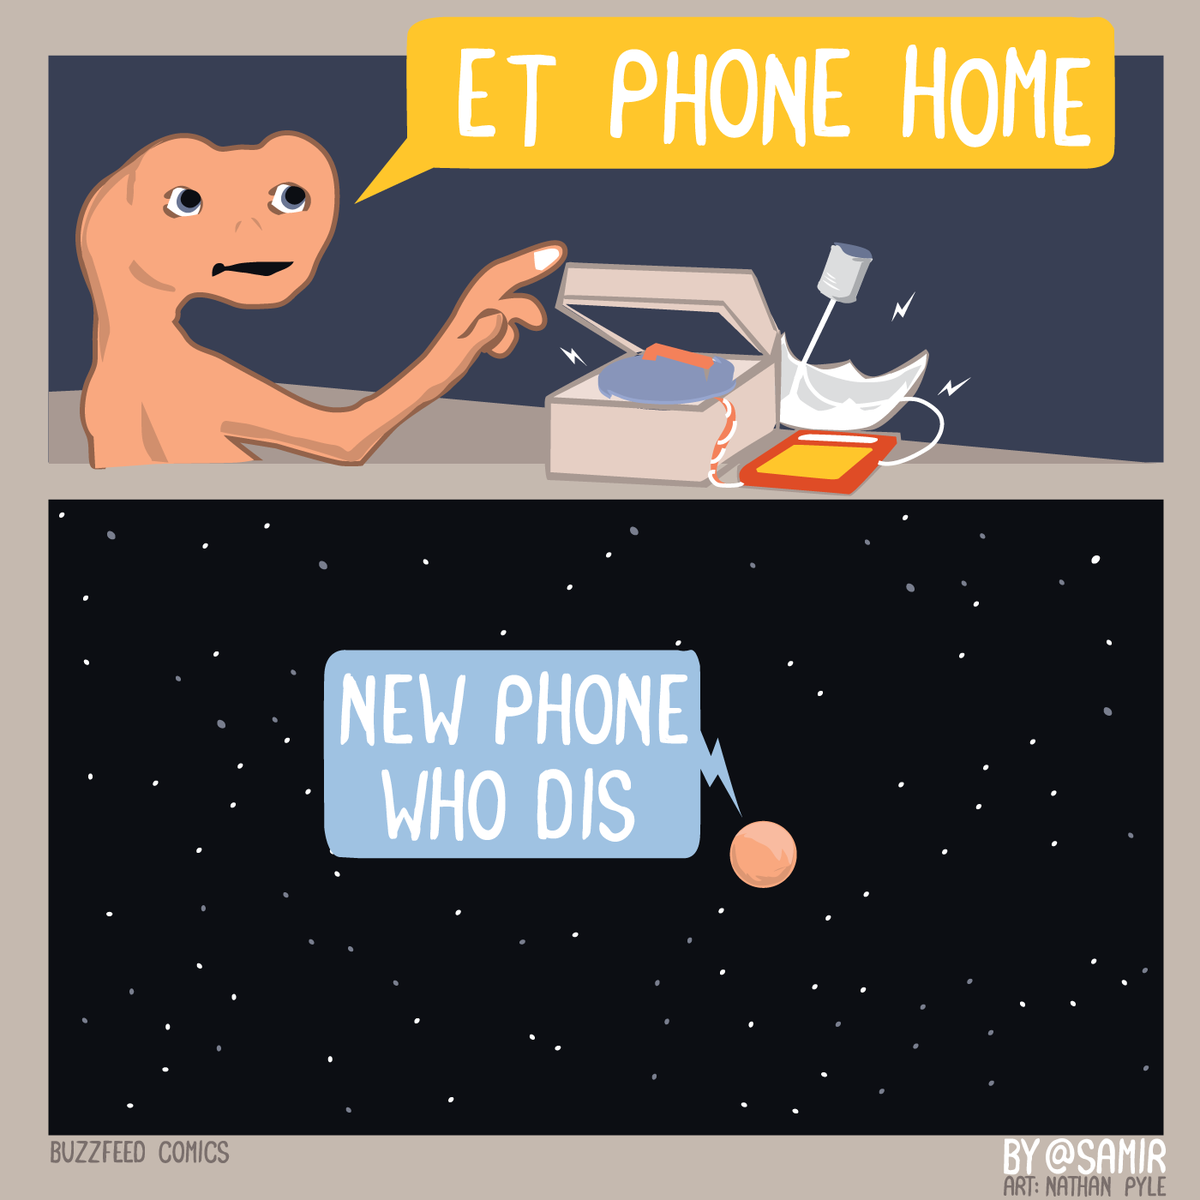 ET can't phone homepic.twitter.com/rvqY2mQNwD. 